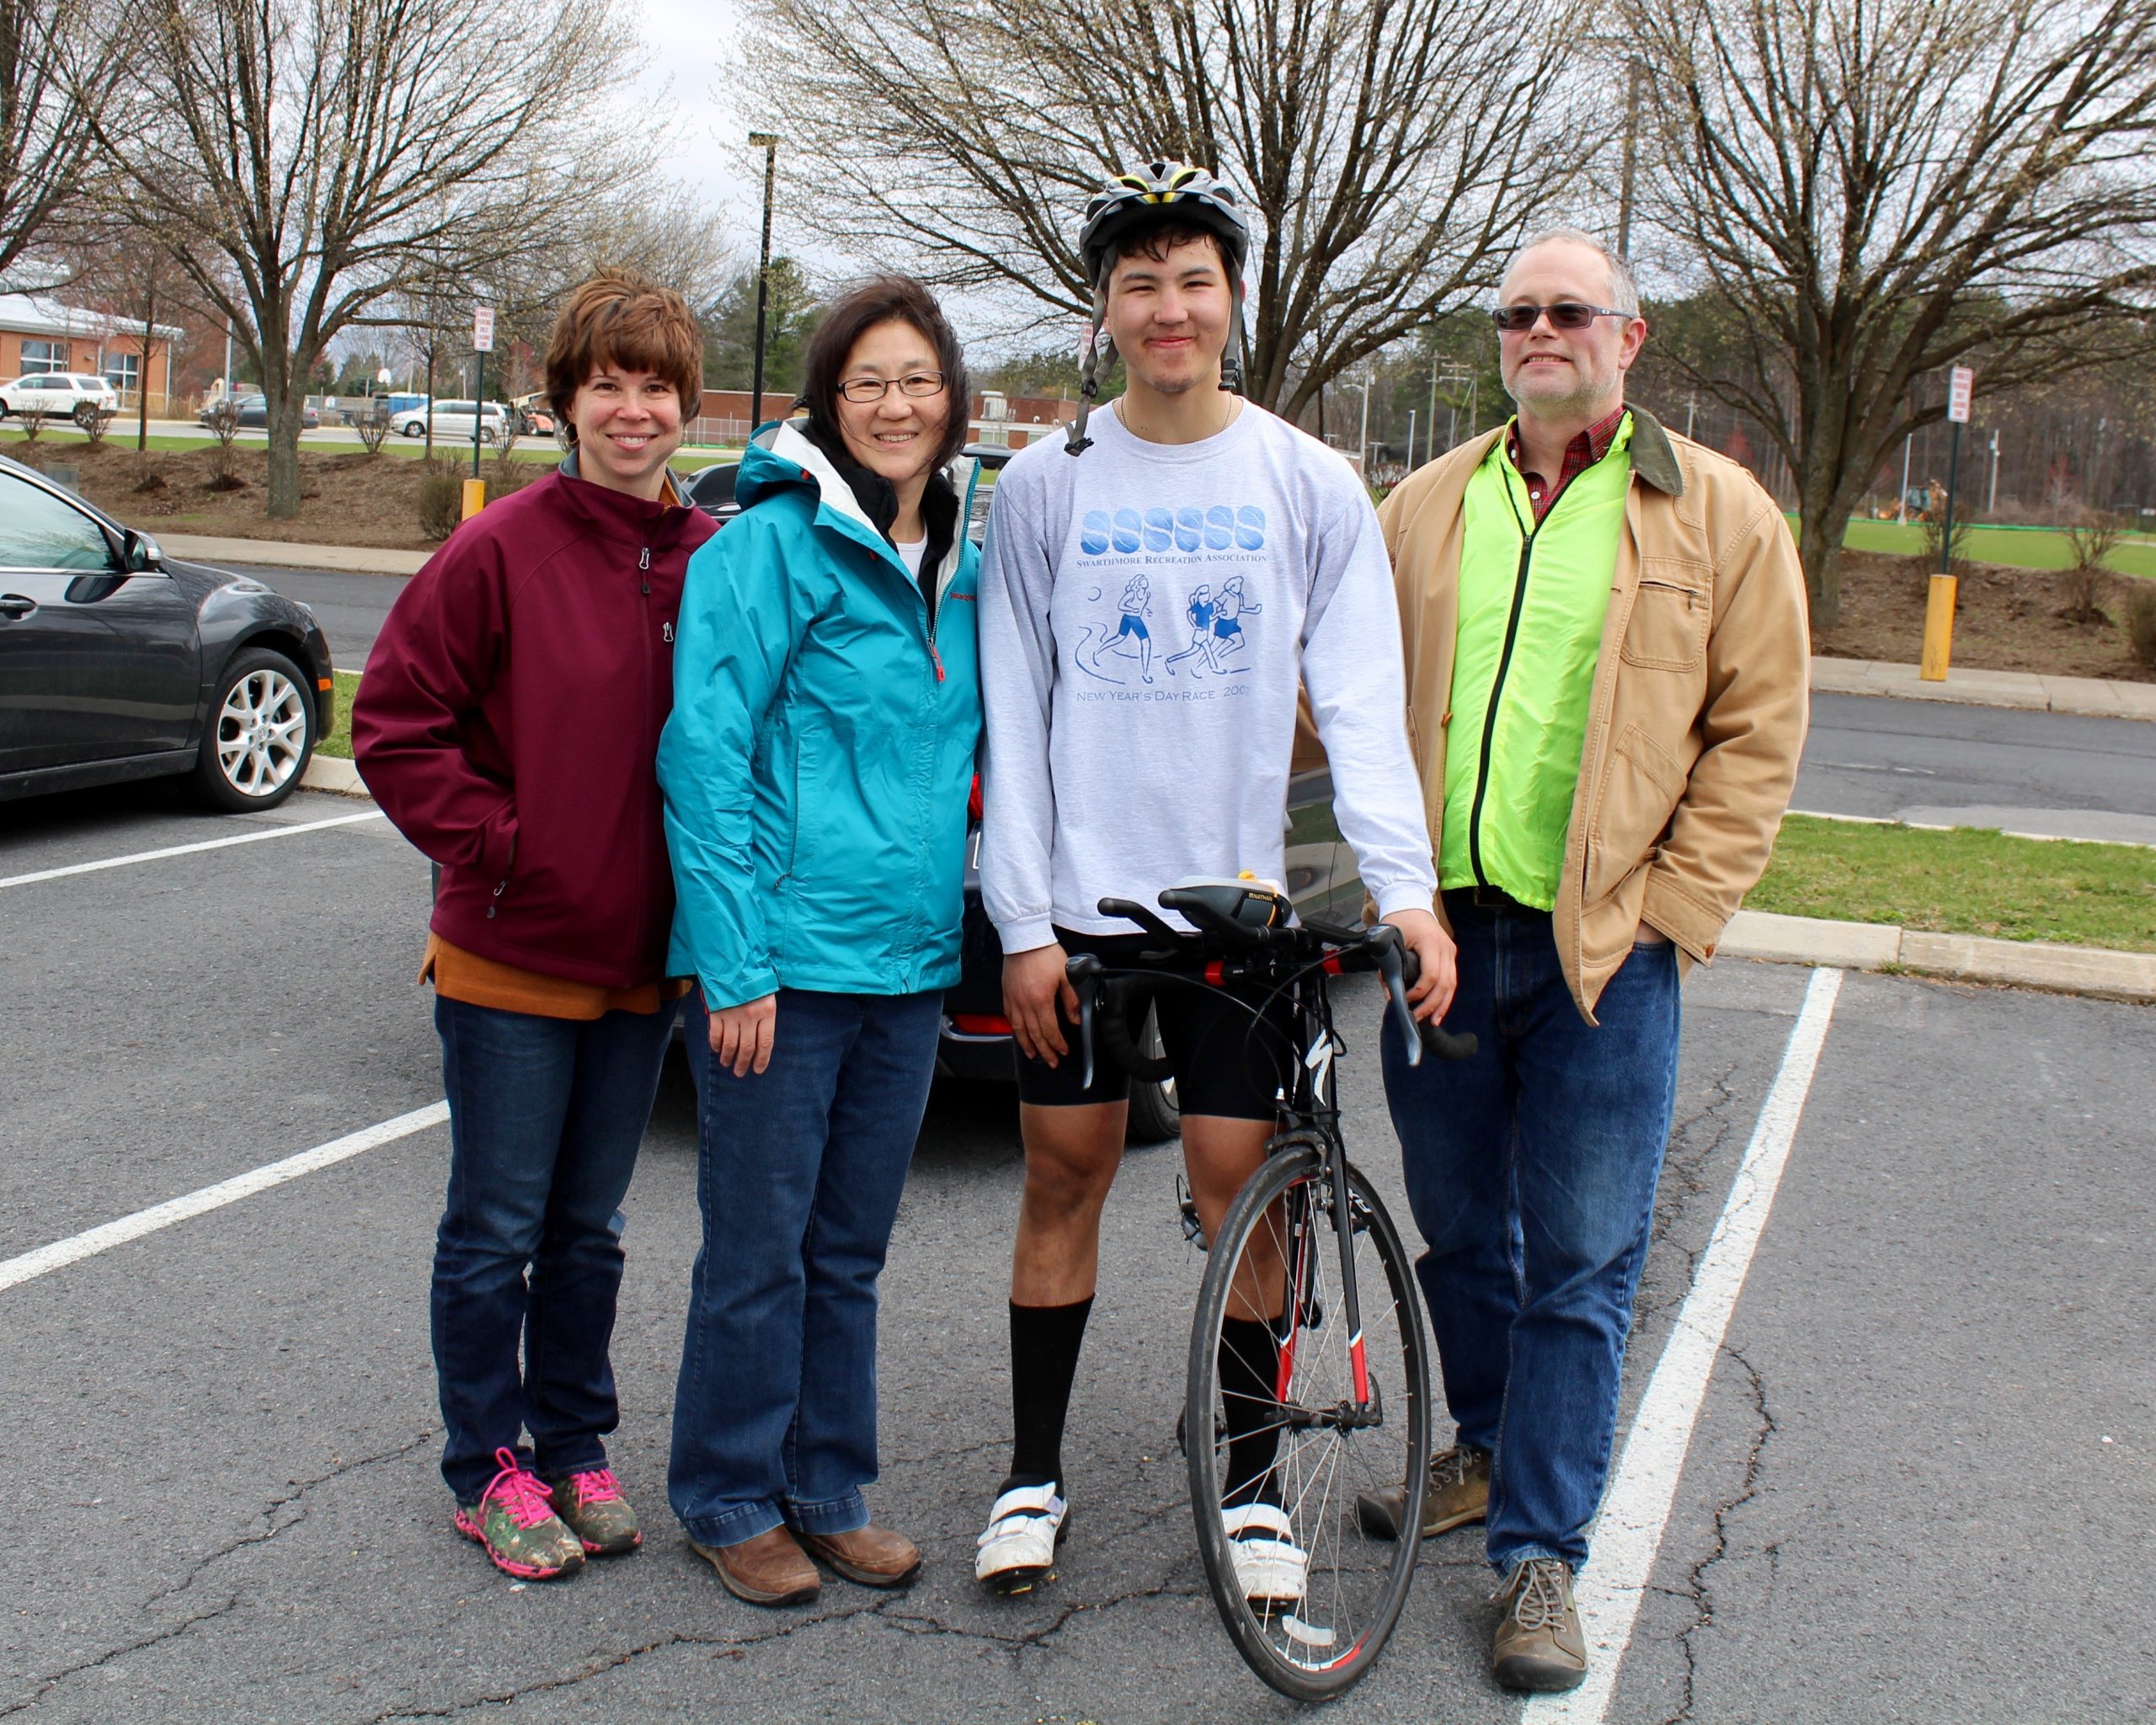 State High Senior Cycles 500 Miles in Five Days to Raise Money, Awareness